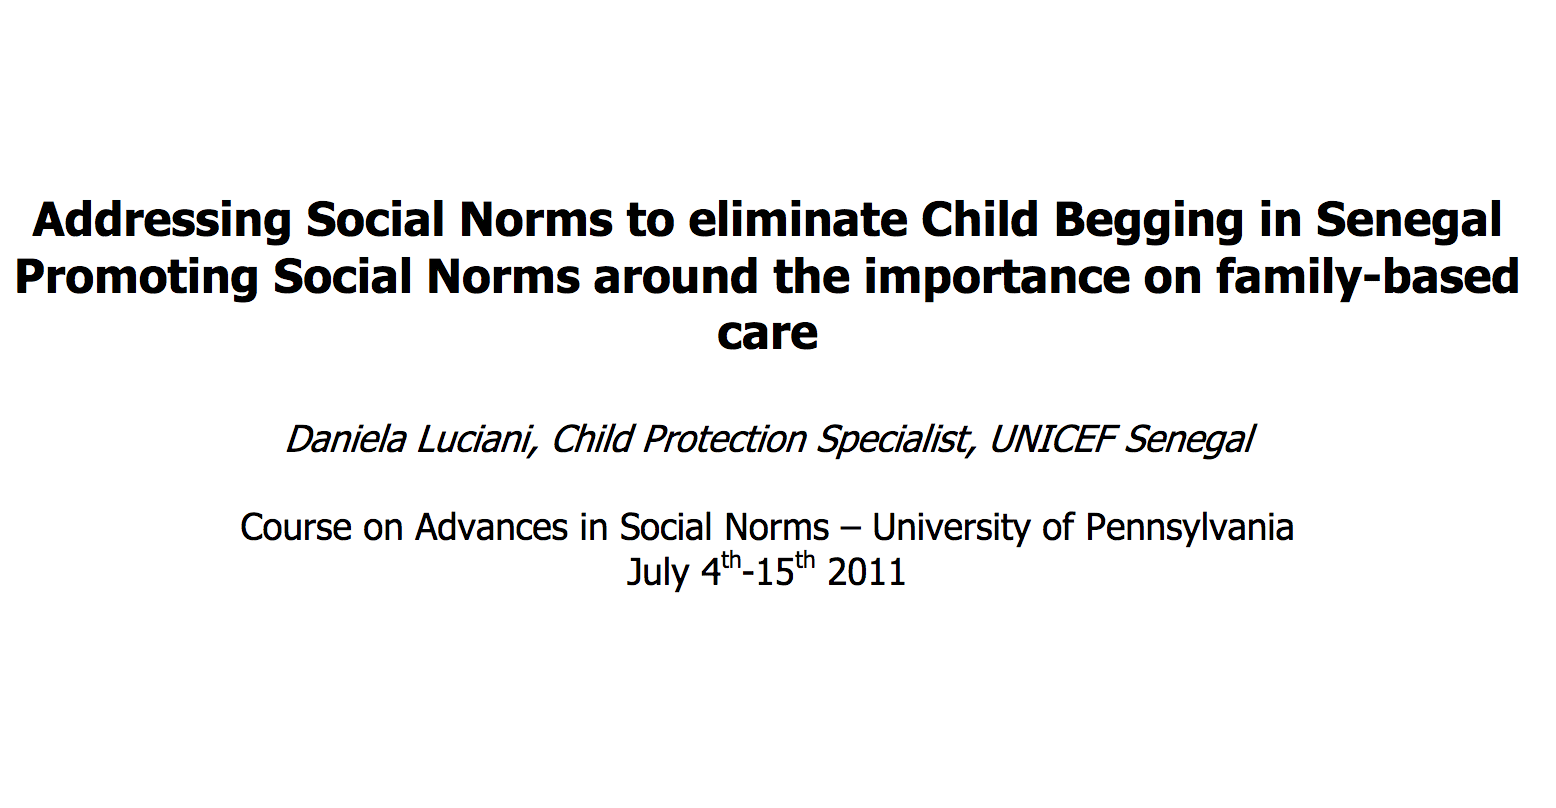 Addressing Social Norms to eliminate Child Begging in Senegal Promoting Social Norms around the importance on family-based care